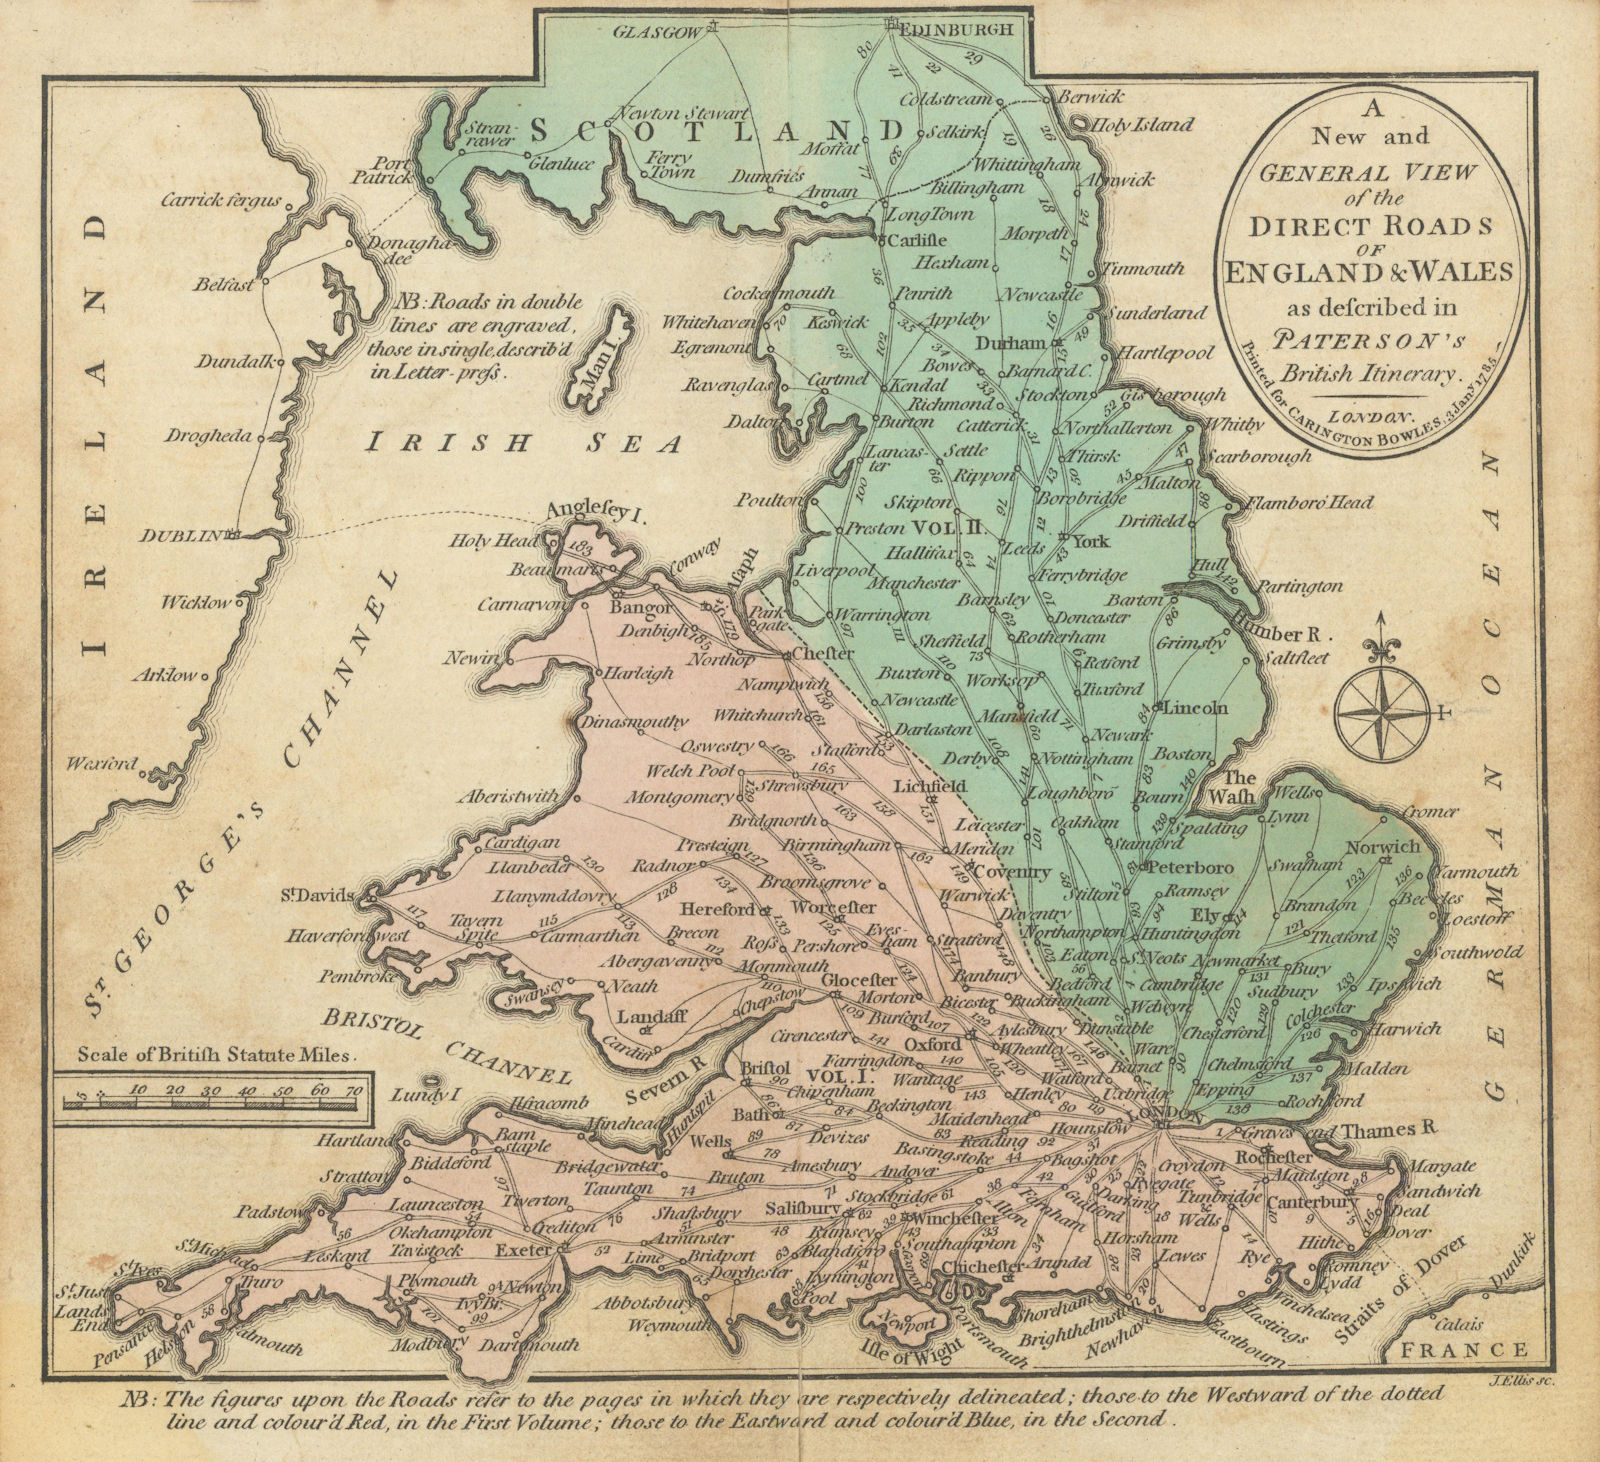 A New and General view of the Direct Roads of England & Wales. PATERSON 1785 map